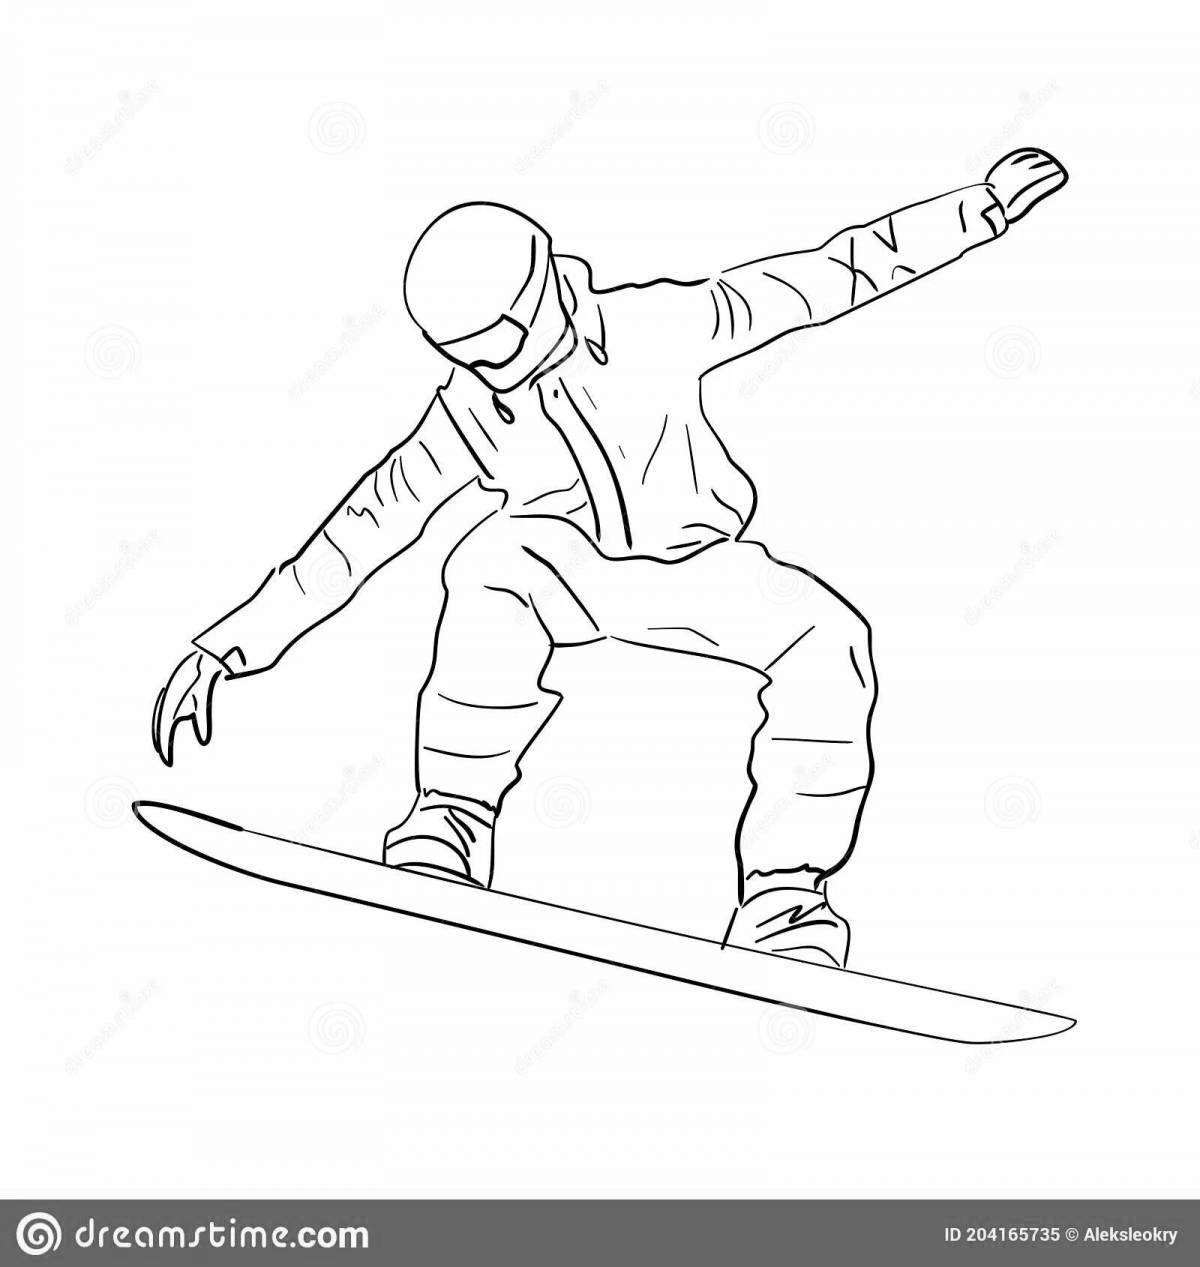 Adorable snowboarder coloring book for kids